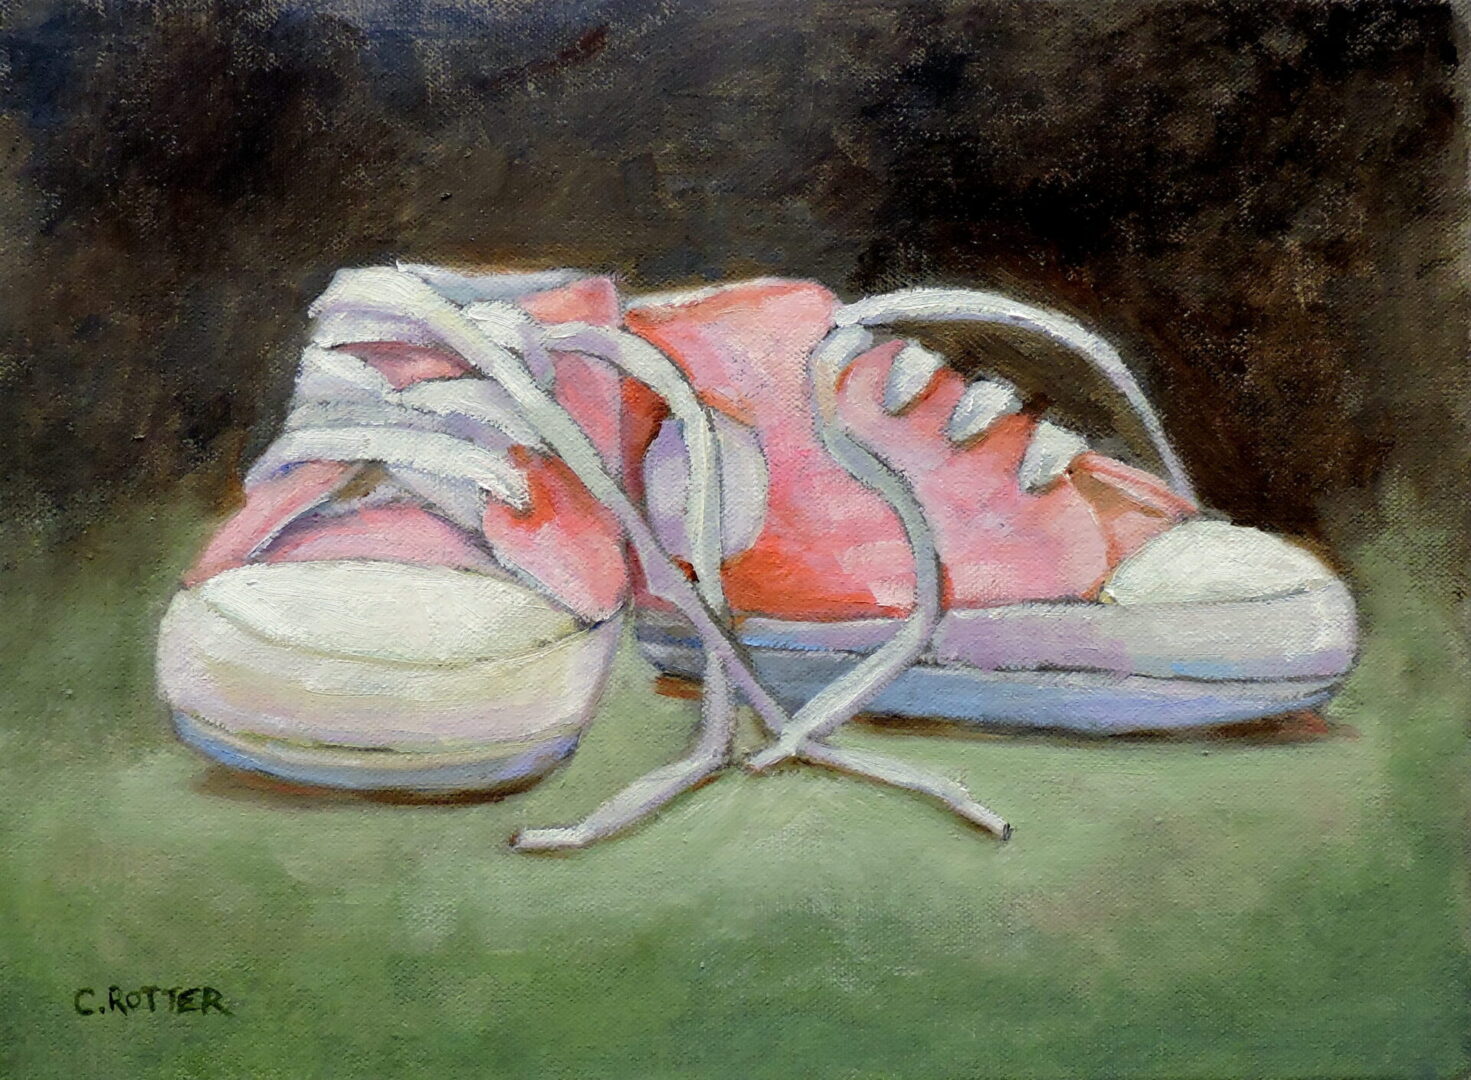 Painting Of Pretty In Pink Sneakers